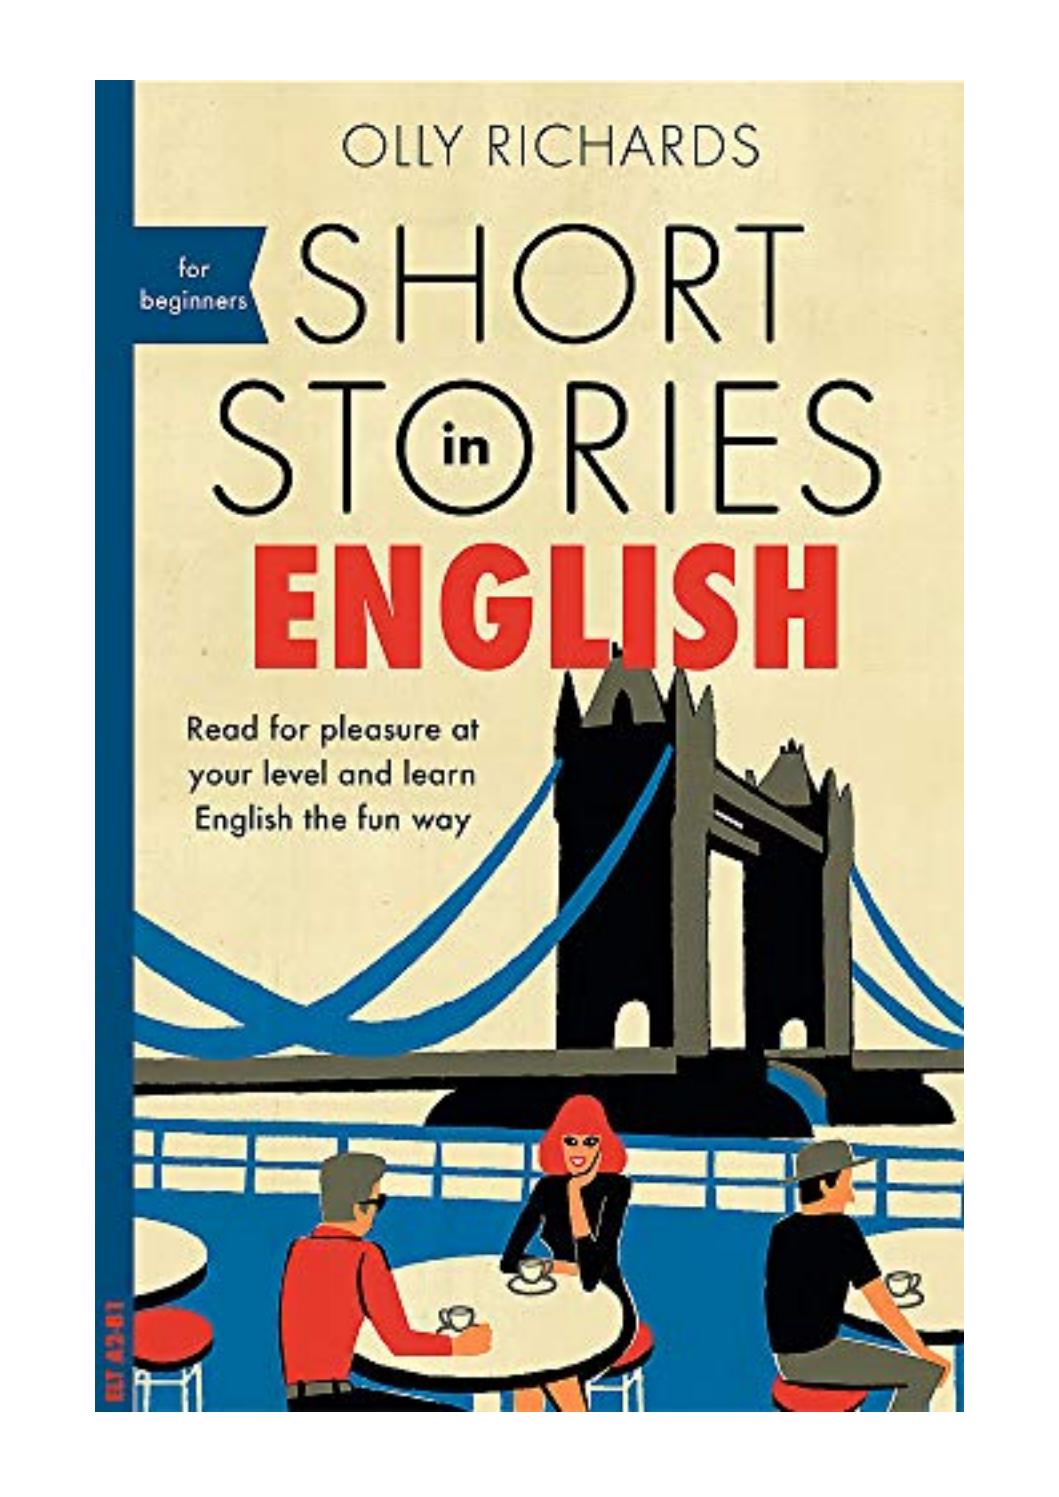 Short Stories in English for Beginner: Foreign Language Graded Reader Series